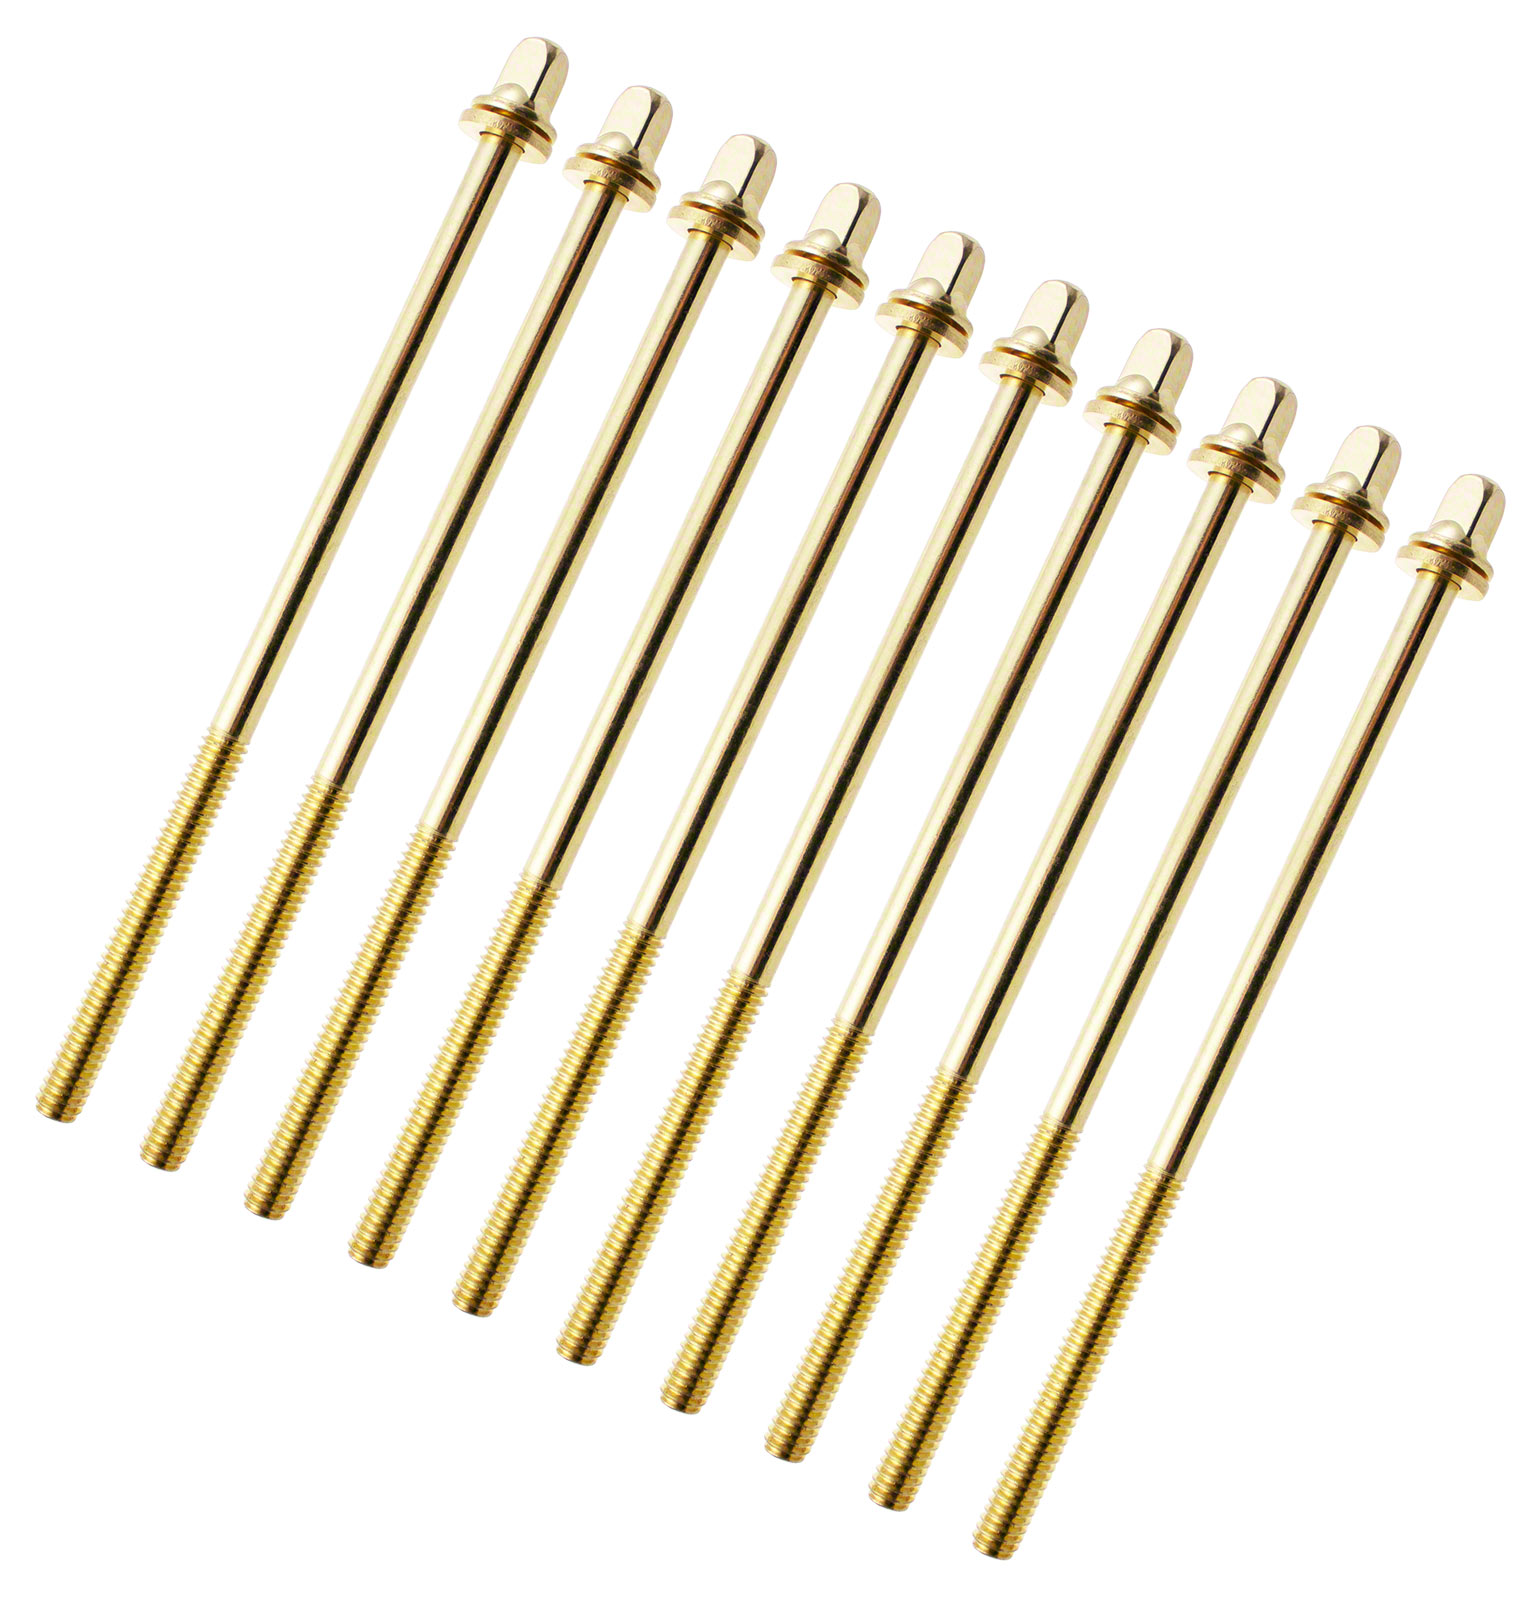 SPAREDRUM TRC-115W-BR - 115MM TENSION ROD BRASS WITH WASHER - 7/32